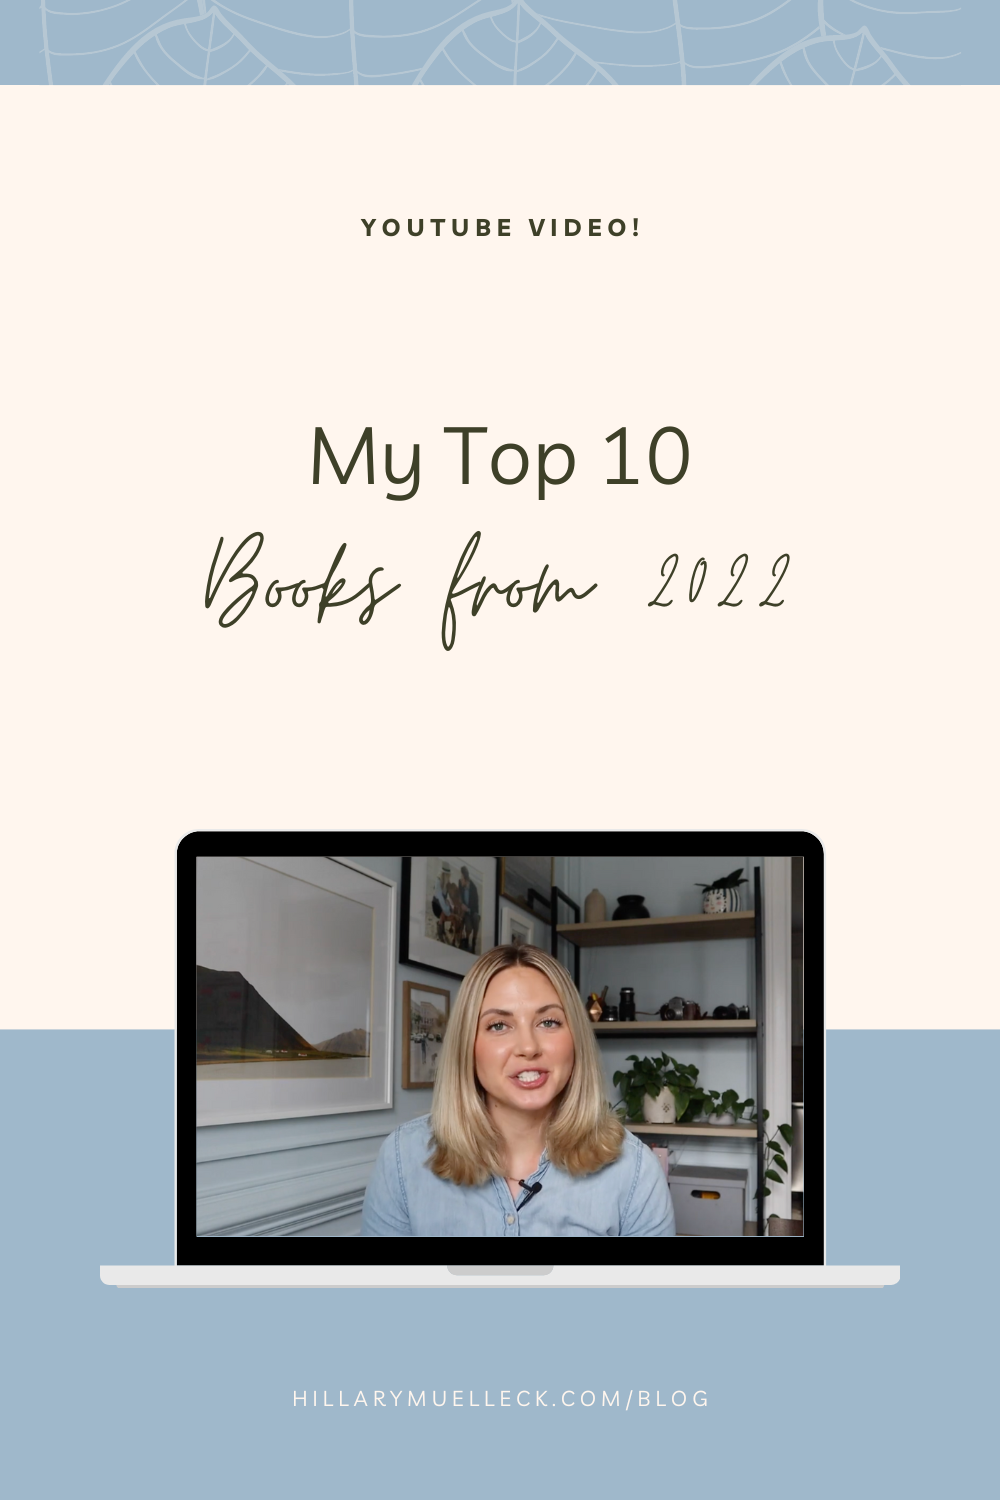 My Top 10 Books from 2022: Hillary Muelleck shares the books she loved reading during the year to end 2022